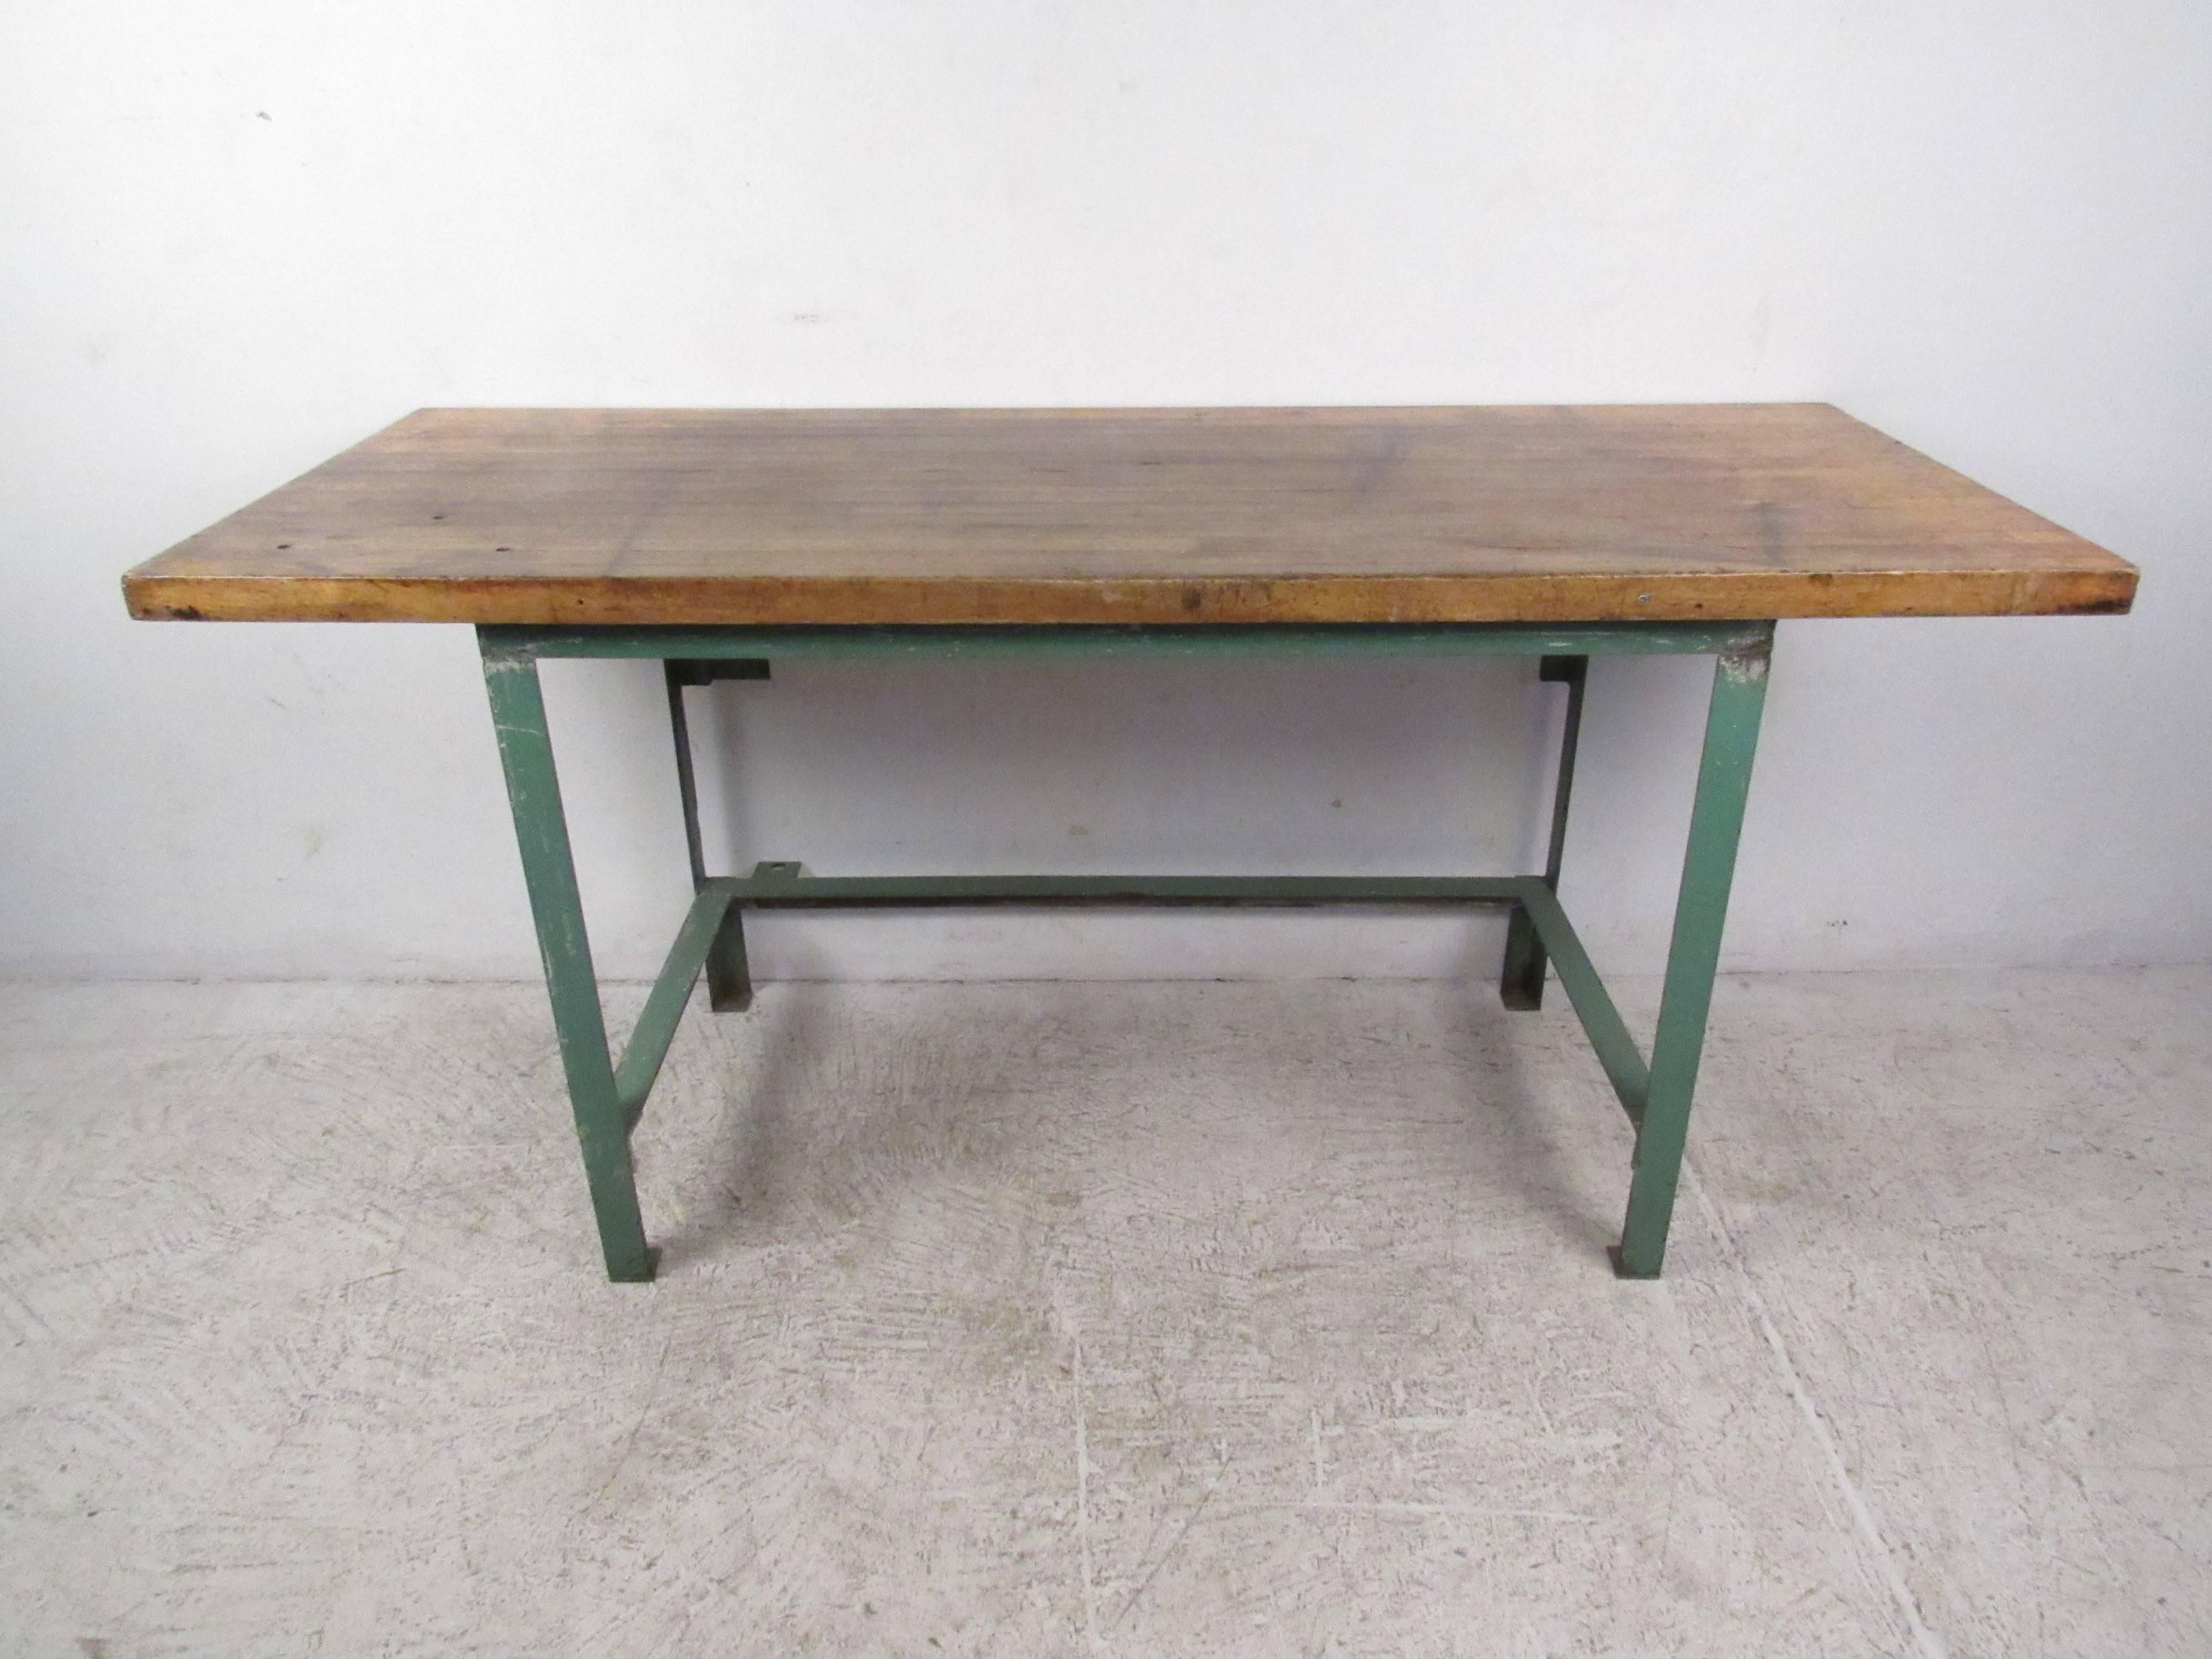 This tall workshop bench makes an ideal work station for any vintage industrial setting. Heavy metal construction with a thick wooden top, this vintage machine table shows signs of age and use related distress. Great piece for workbench or desk,